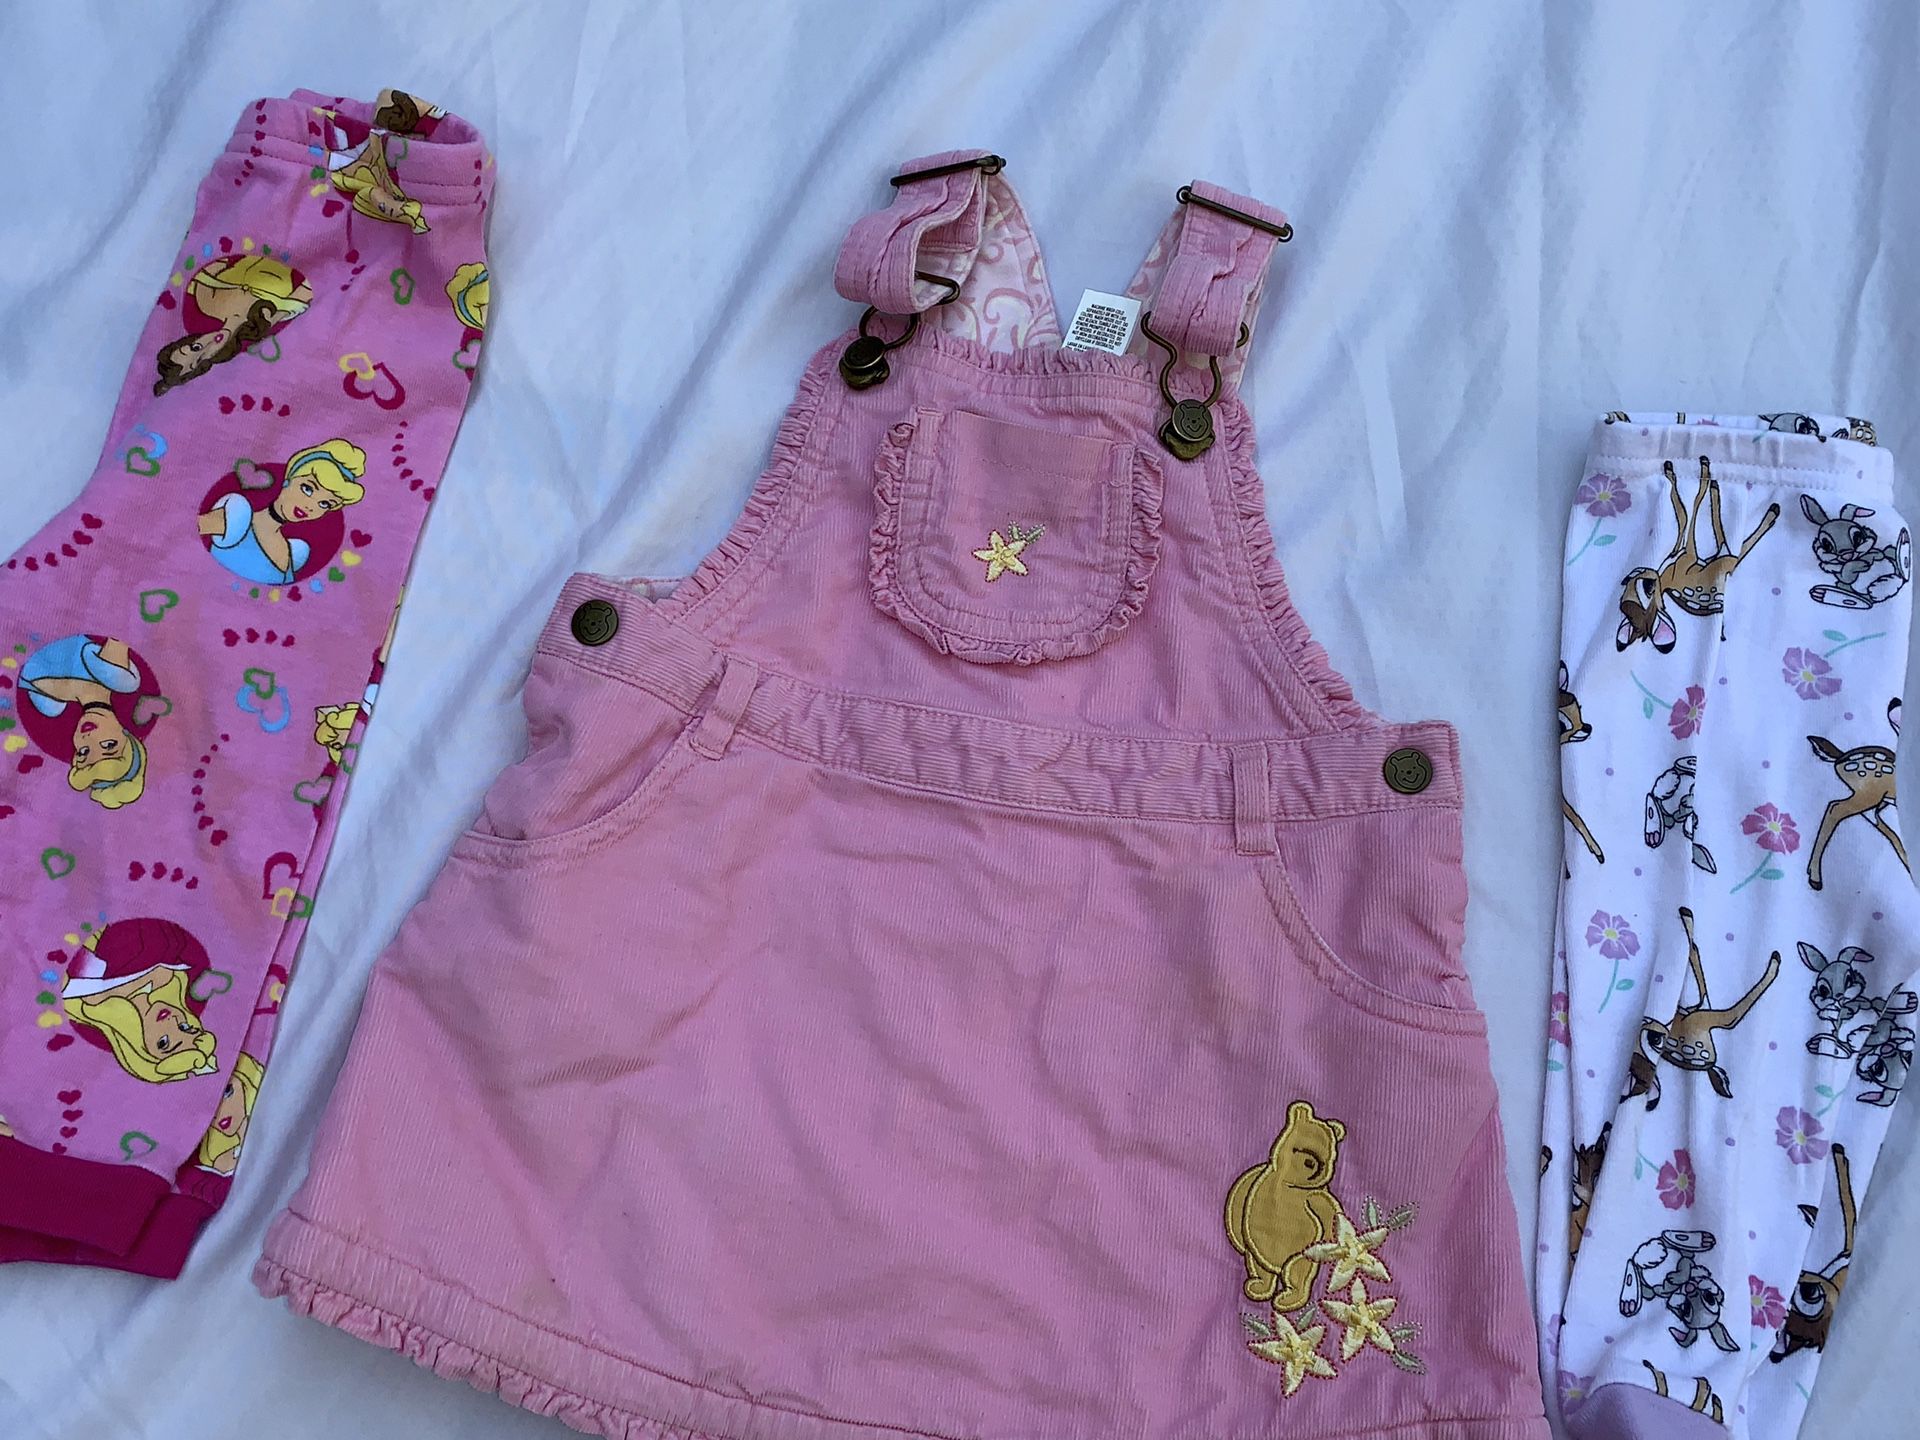 3 piece baby girls fall spring winter Disney Bambi size 12 months 🦌 lot pajamas bottoms overalls 👸 Winnie the Pooh 🐻